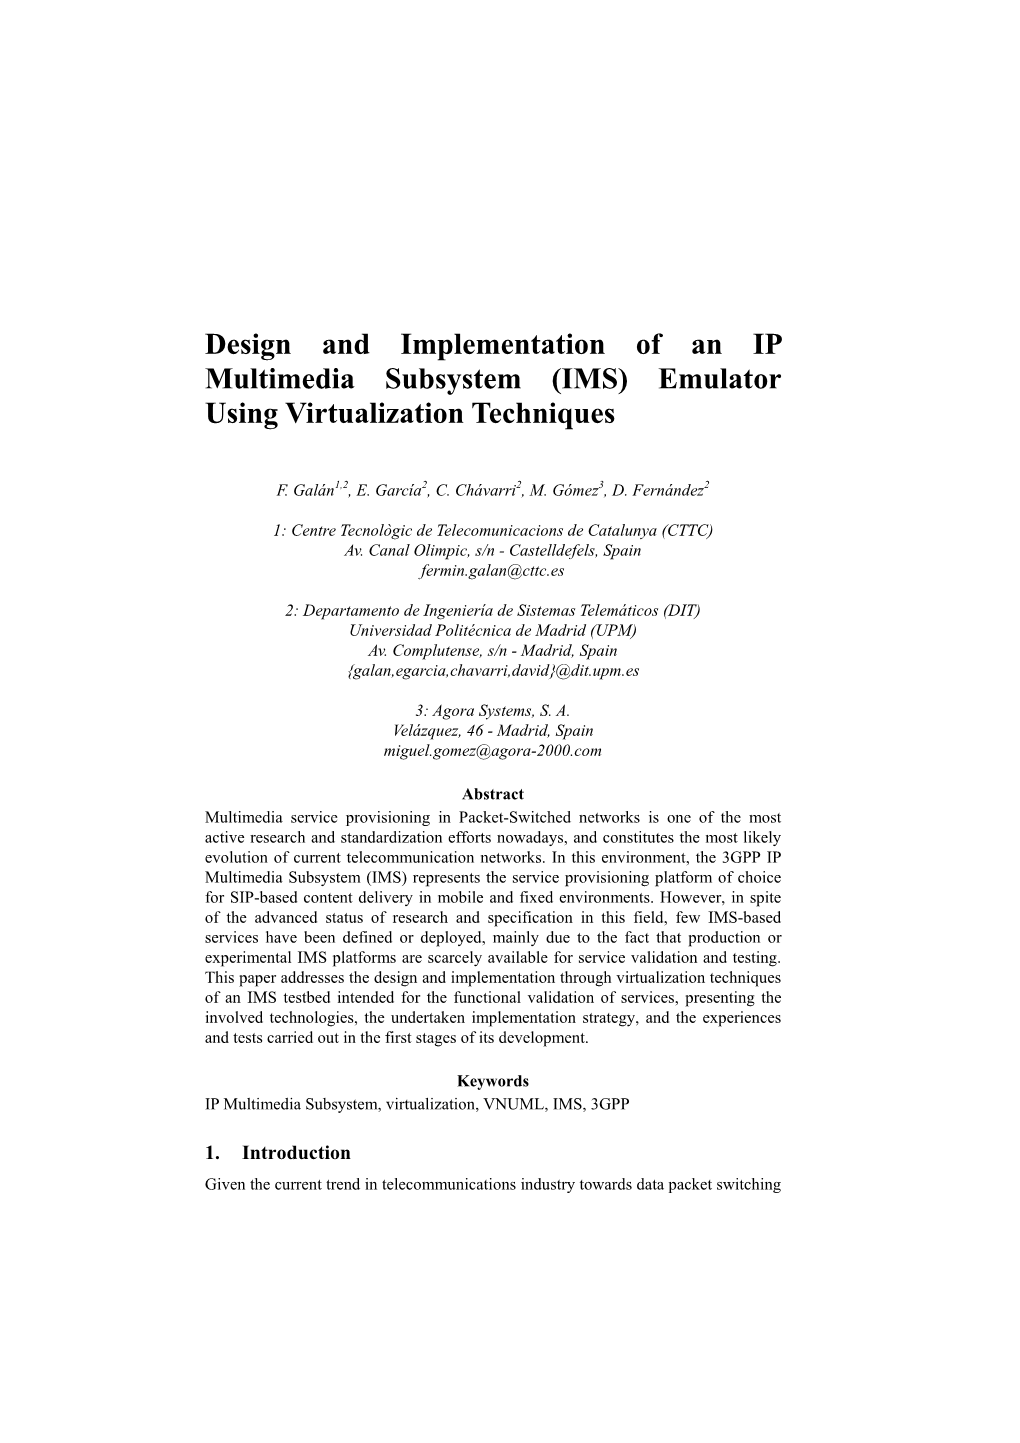 Design and Implementation of an IP Multimedia Subsystem (IMS) Emulator Using Virtualization Techniques